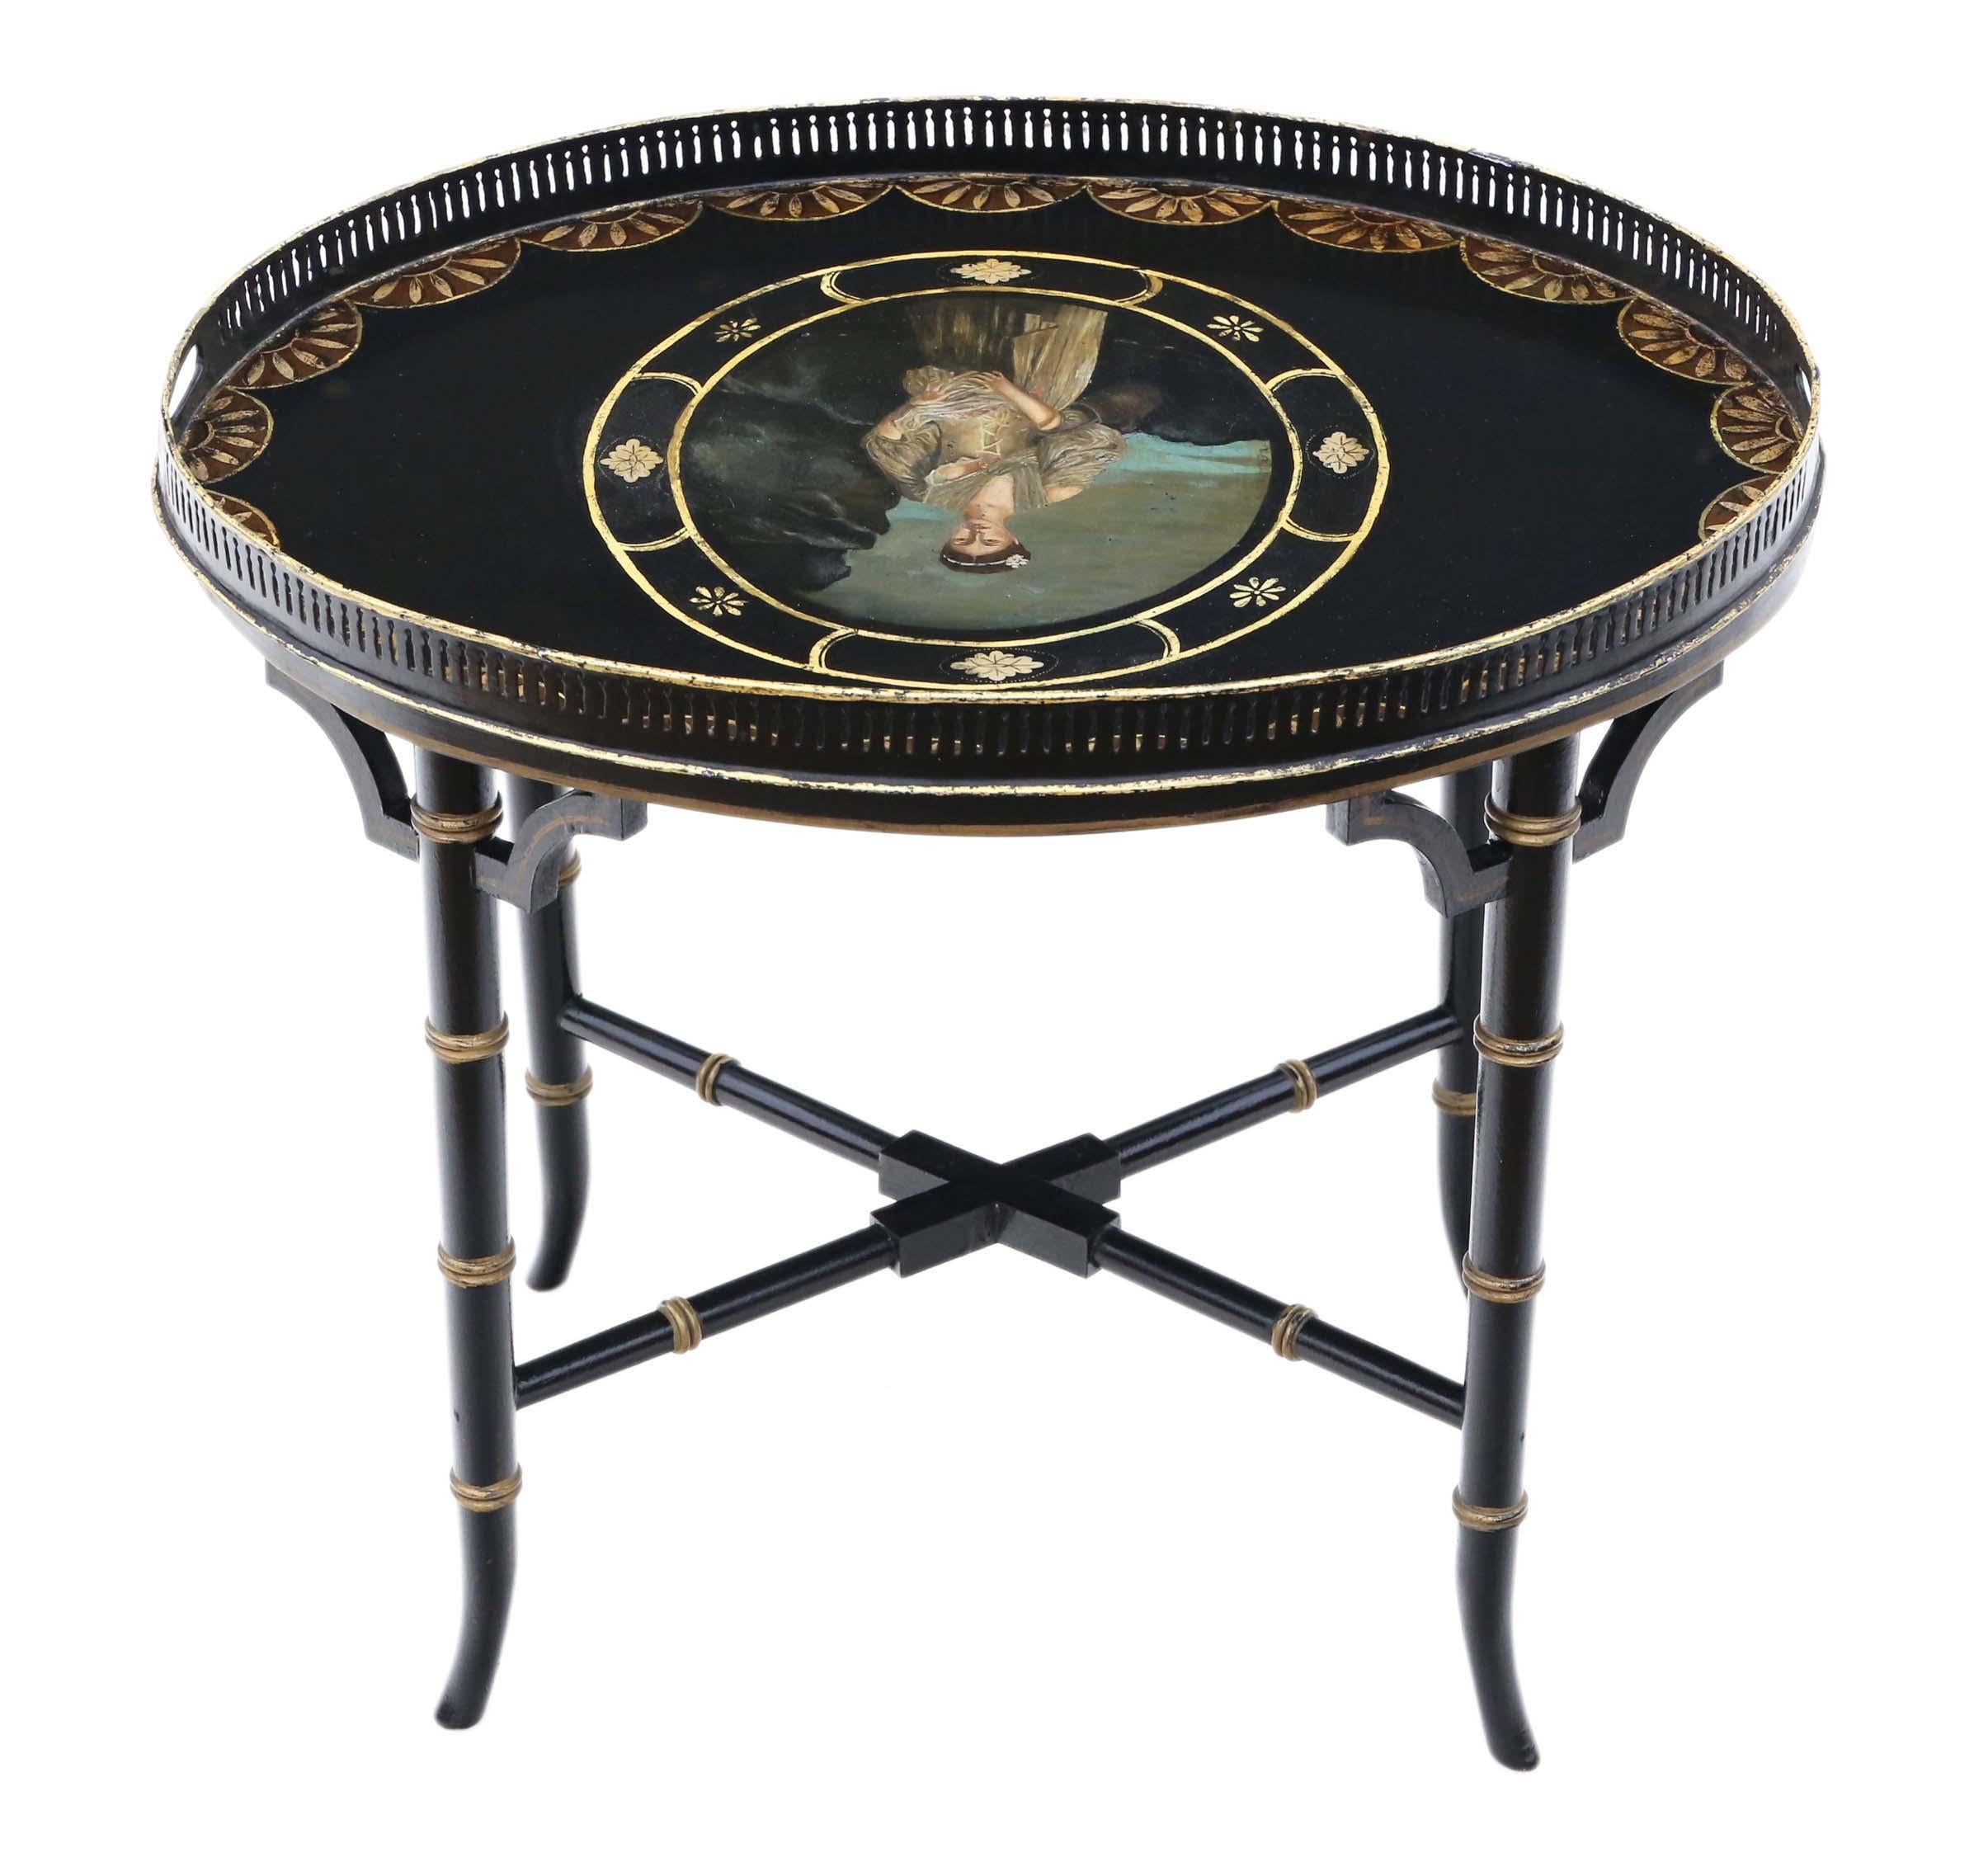 Late 19th Century Antique Black Lacquer Painted Serving Tray on Stand Coffee Table